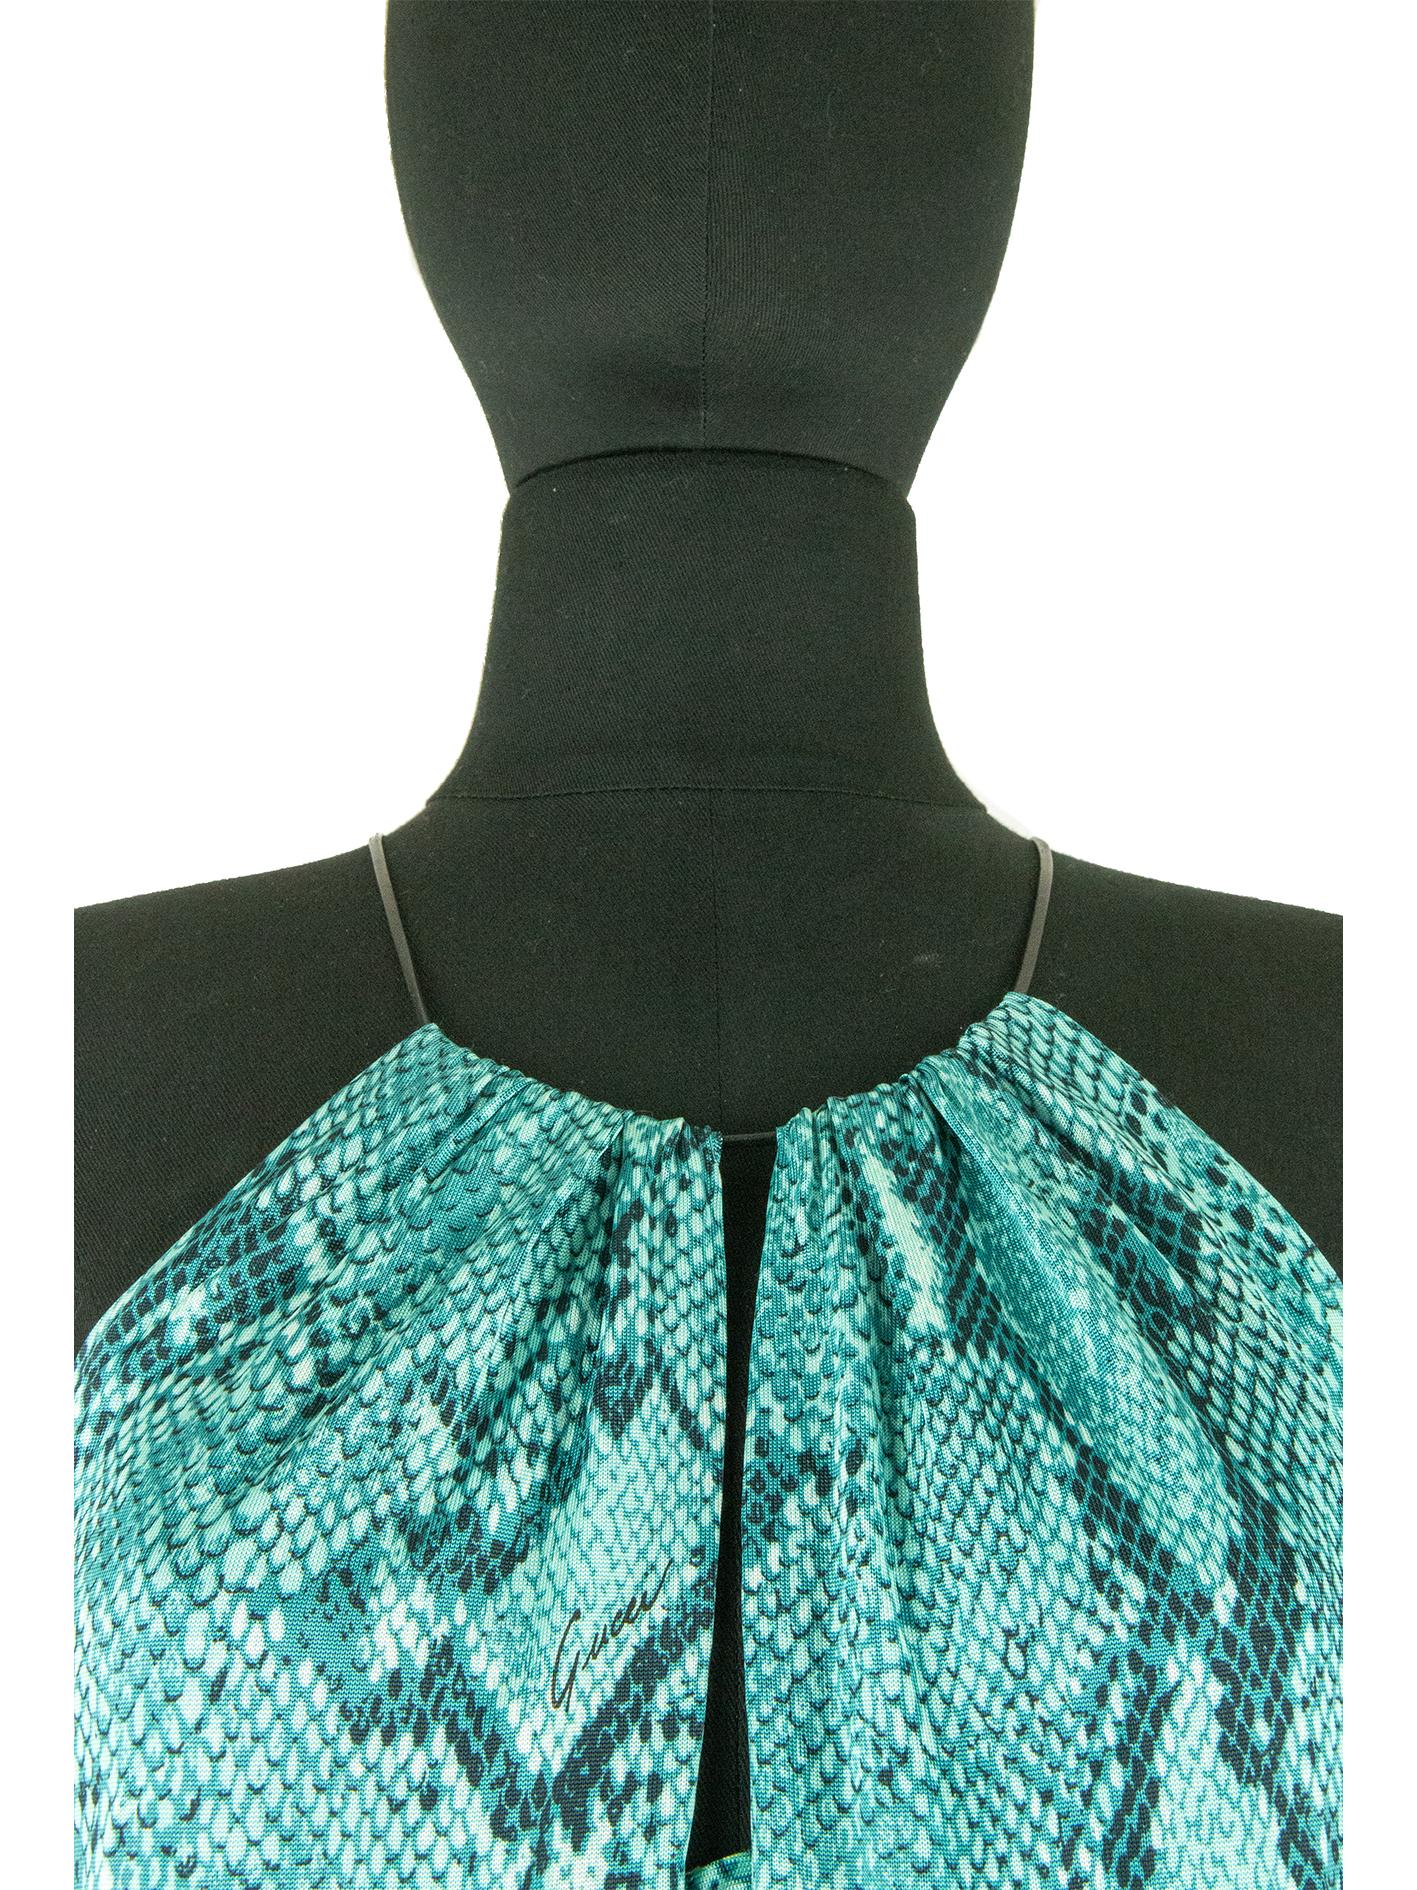 Women's Spring 2000 Gucci by Tom Ford Green, Turquoise And Black Snakeskin Print Dress For Sale